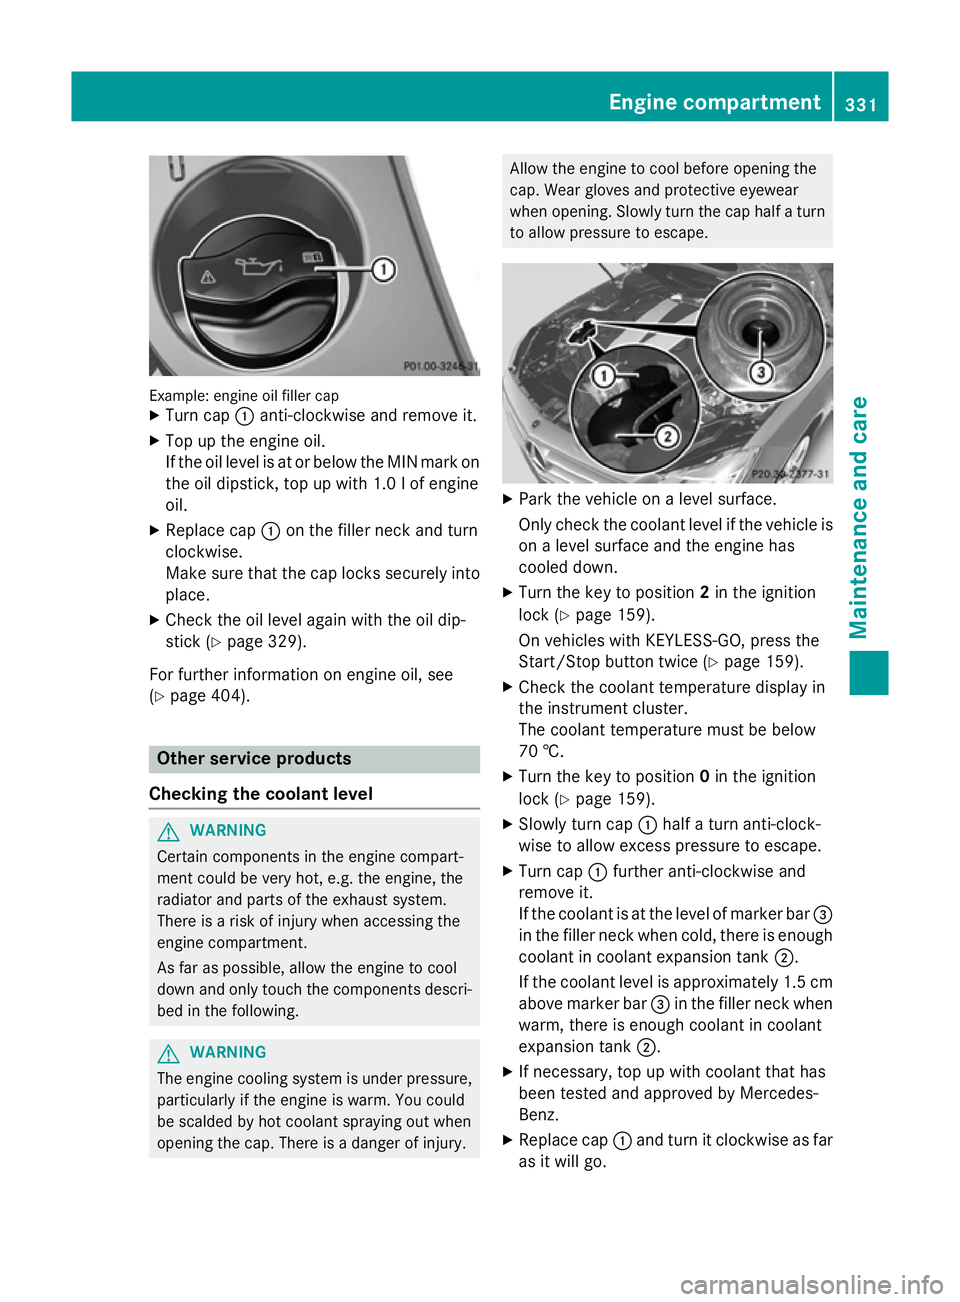 MERCEDES-BENZ CLS COUPE 2014  Owners Manual Example: engine oil filler cap
X Turn cap :anti-clockwise and remove it.
X Top up the engine oil.
If the oil level is at or below the MIN mark on
the oil dipstick, top up with 1.0 lof engine
oil.
X Re